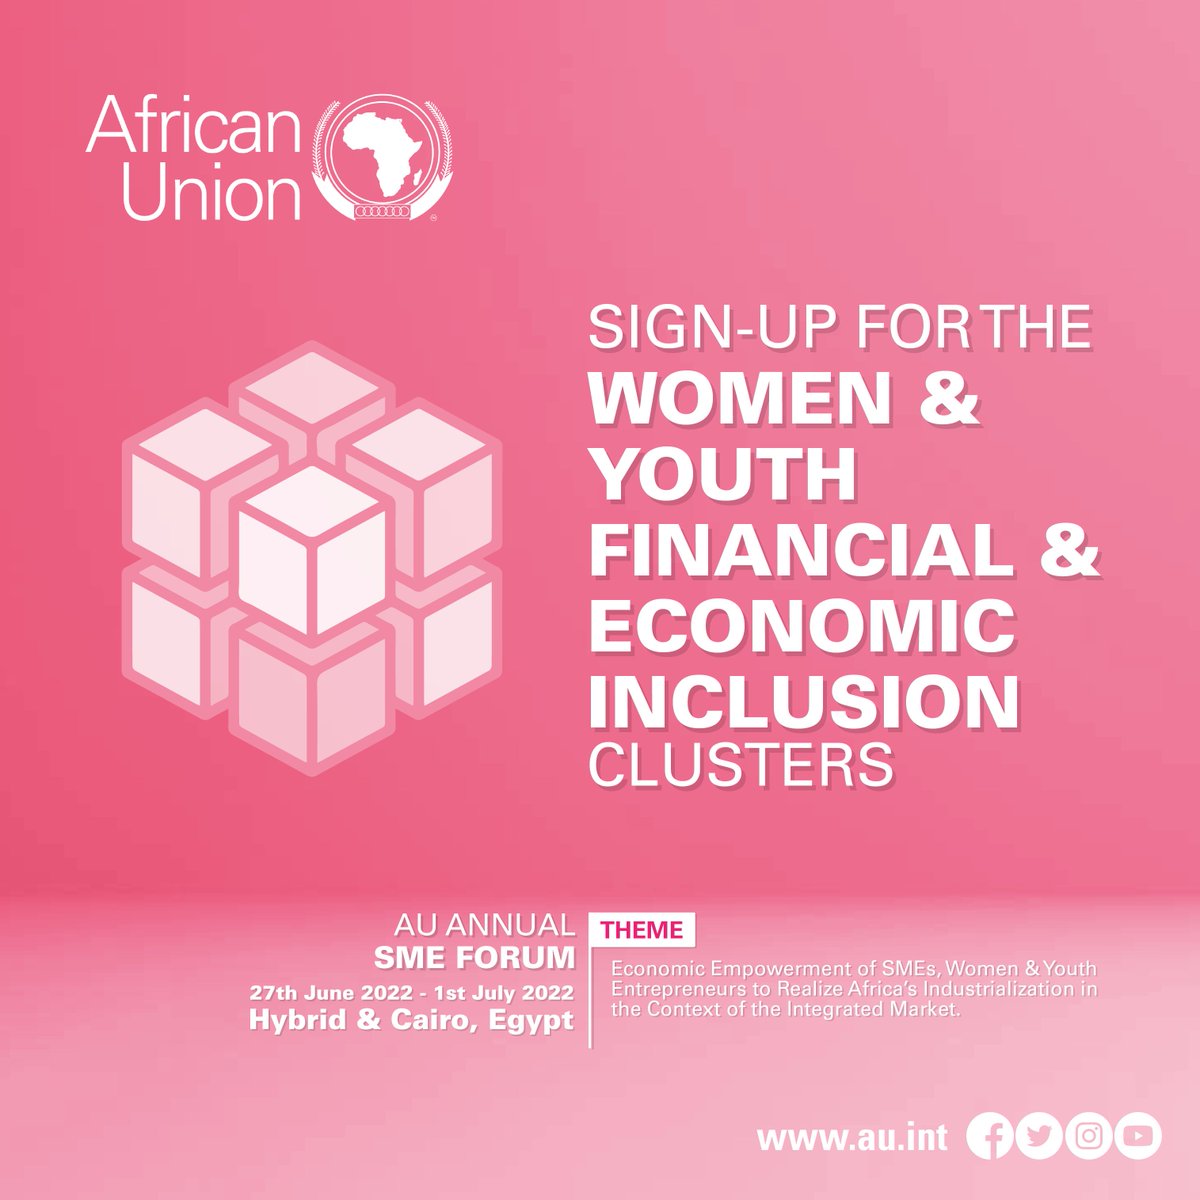 The @AU_WGDD is calling all partners and stakeholders to join the Women & Youth Financial & Economic Inclusion #WYFEI2030 working clusters to drive its implementation, report on the progress, and lessons of the initiative. Click here to sign up: bit.ly/WYFEIClusterSi…